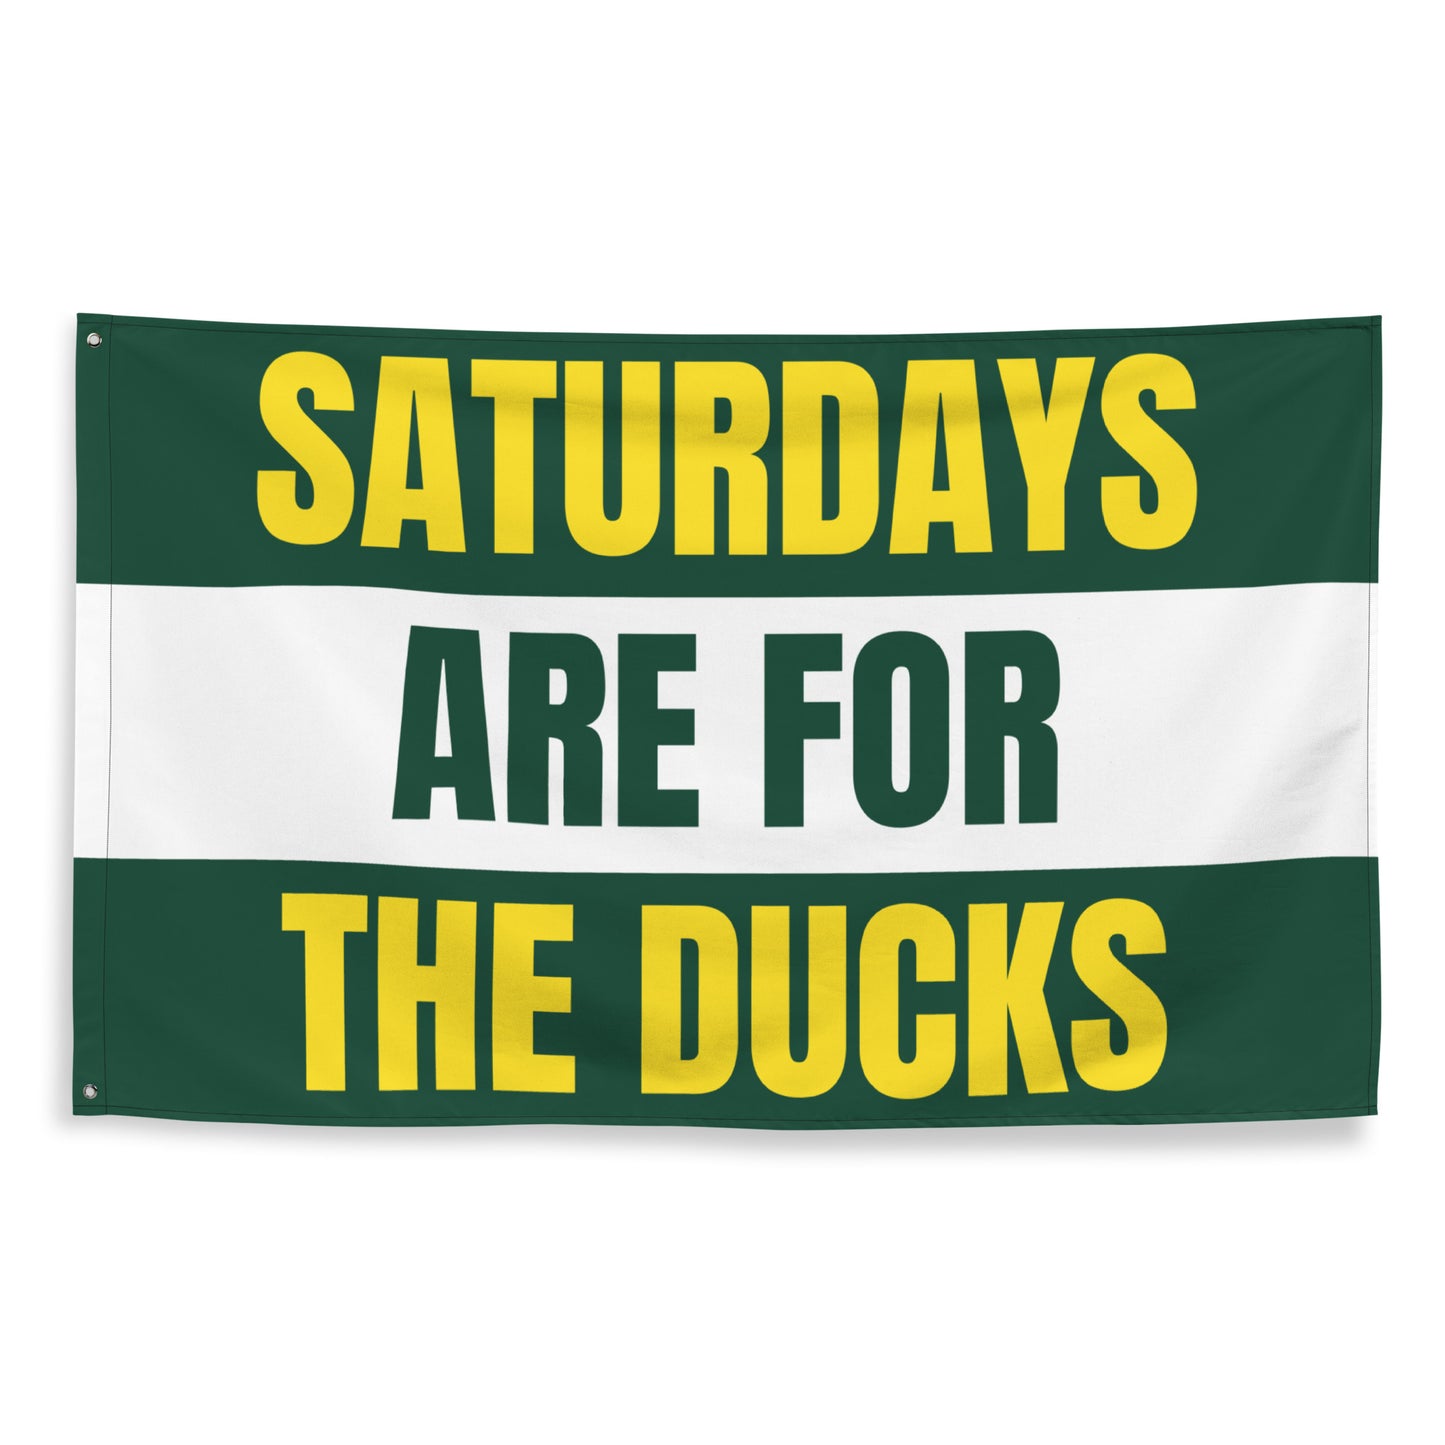 Saturdays Are for the Ducks, Large Ducks Banner, Oregon Flag, Gifts for Him, Dorm